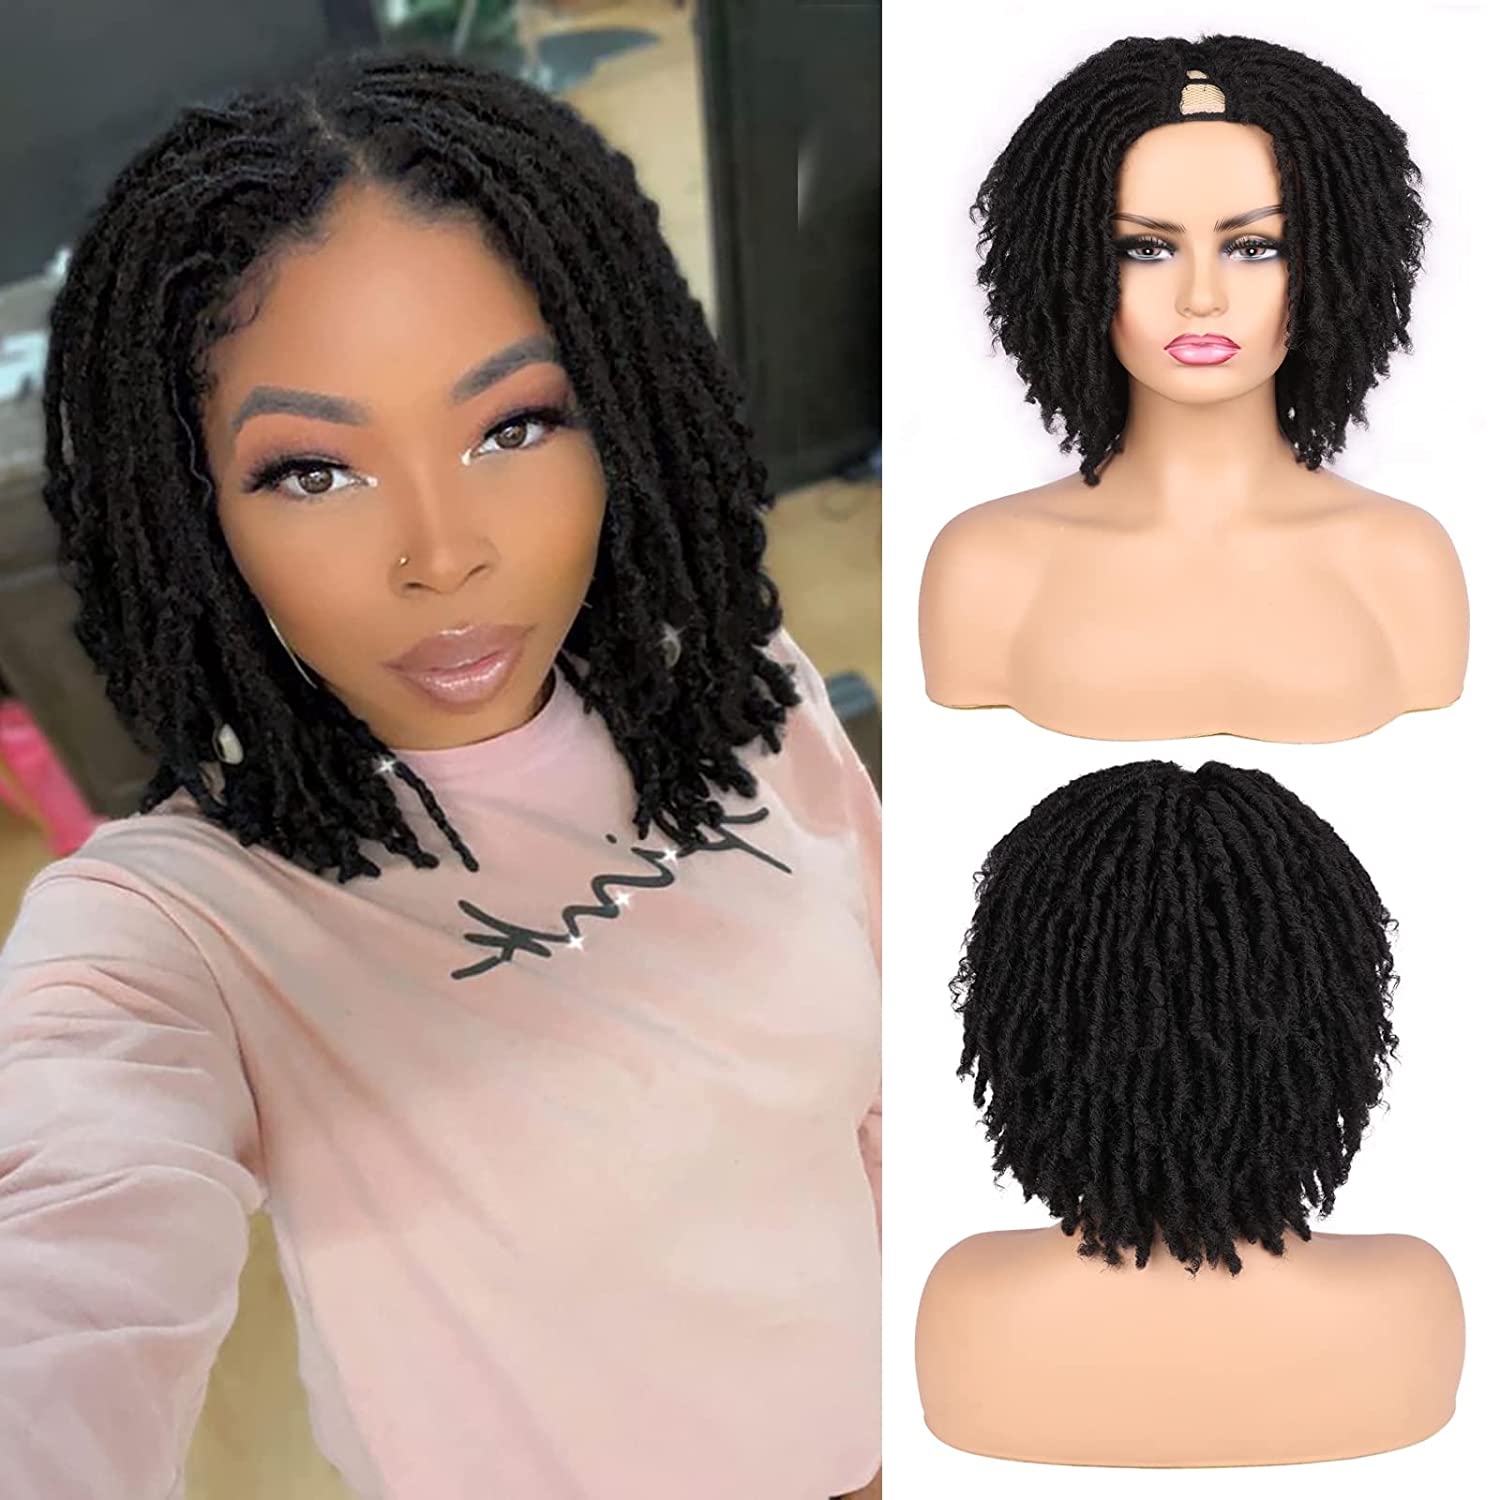 u part dread lock  Our Dreadlock Wig Short Twist Wig is perfect for a natural, stylish look. This lightweight wig features a beautiful twist style and is made of premium heat resistant synthetic fibers. The breathable cap provides superior comfort and an adjustable strap ensures a secure fit. Our Dreadlock Wig Short Twist Wig is perfect for any occasion.